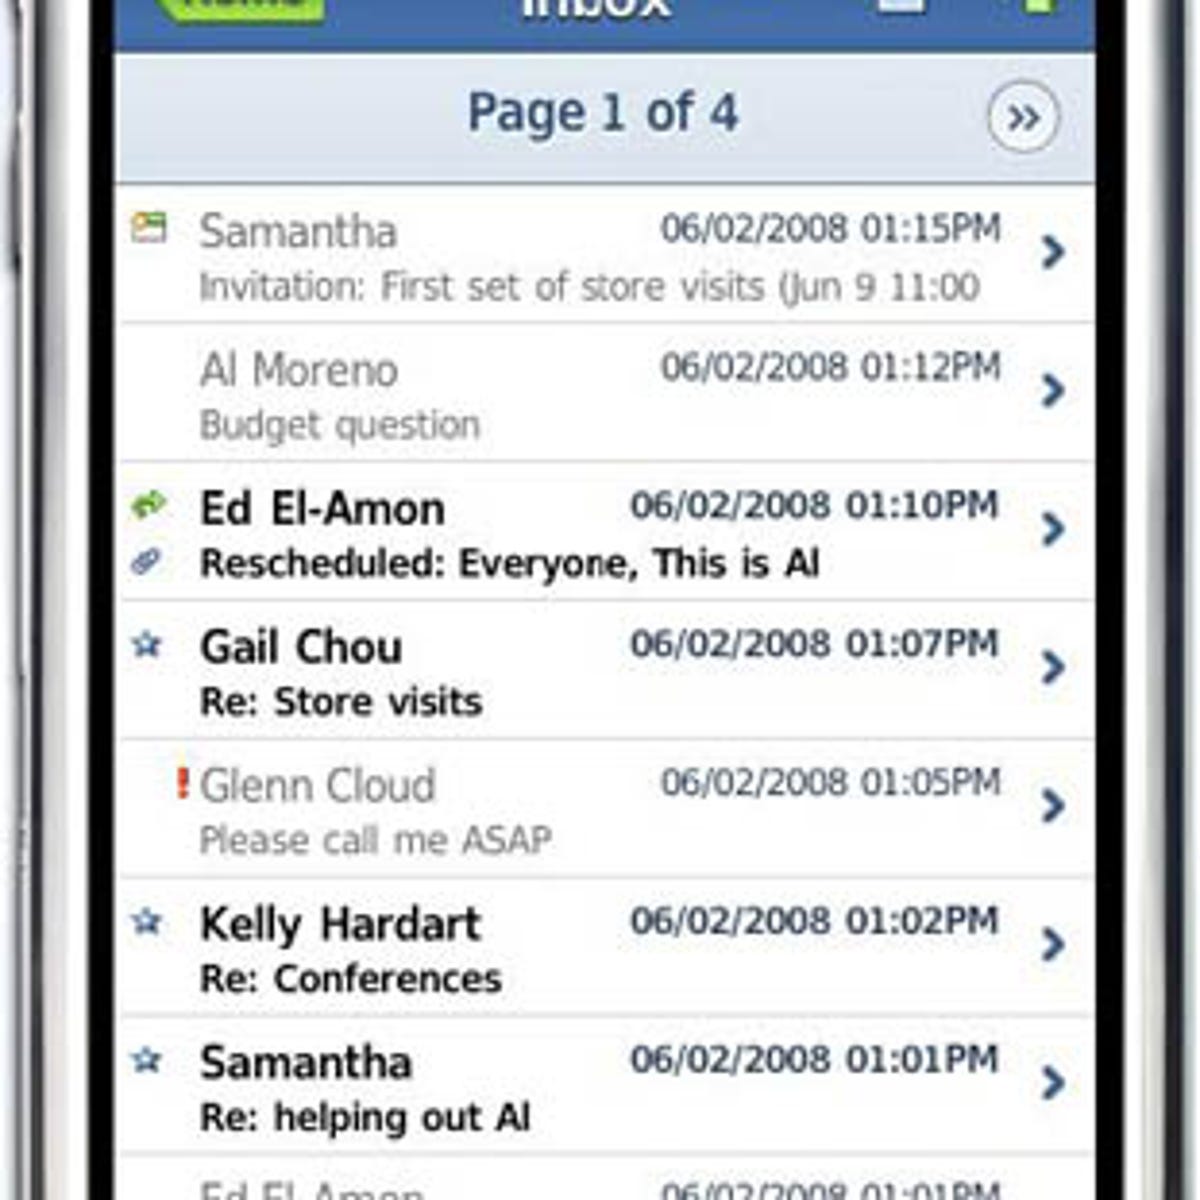 IBM releasing iNotes for iPhone - CNET